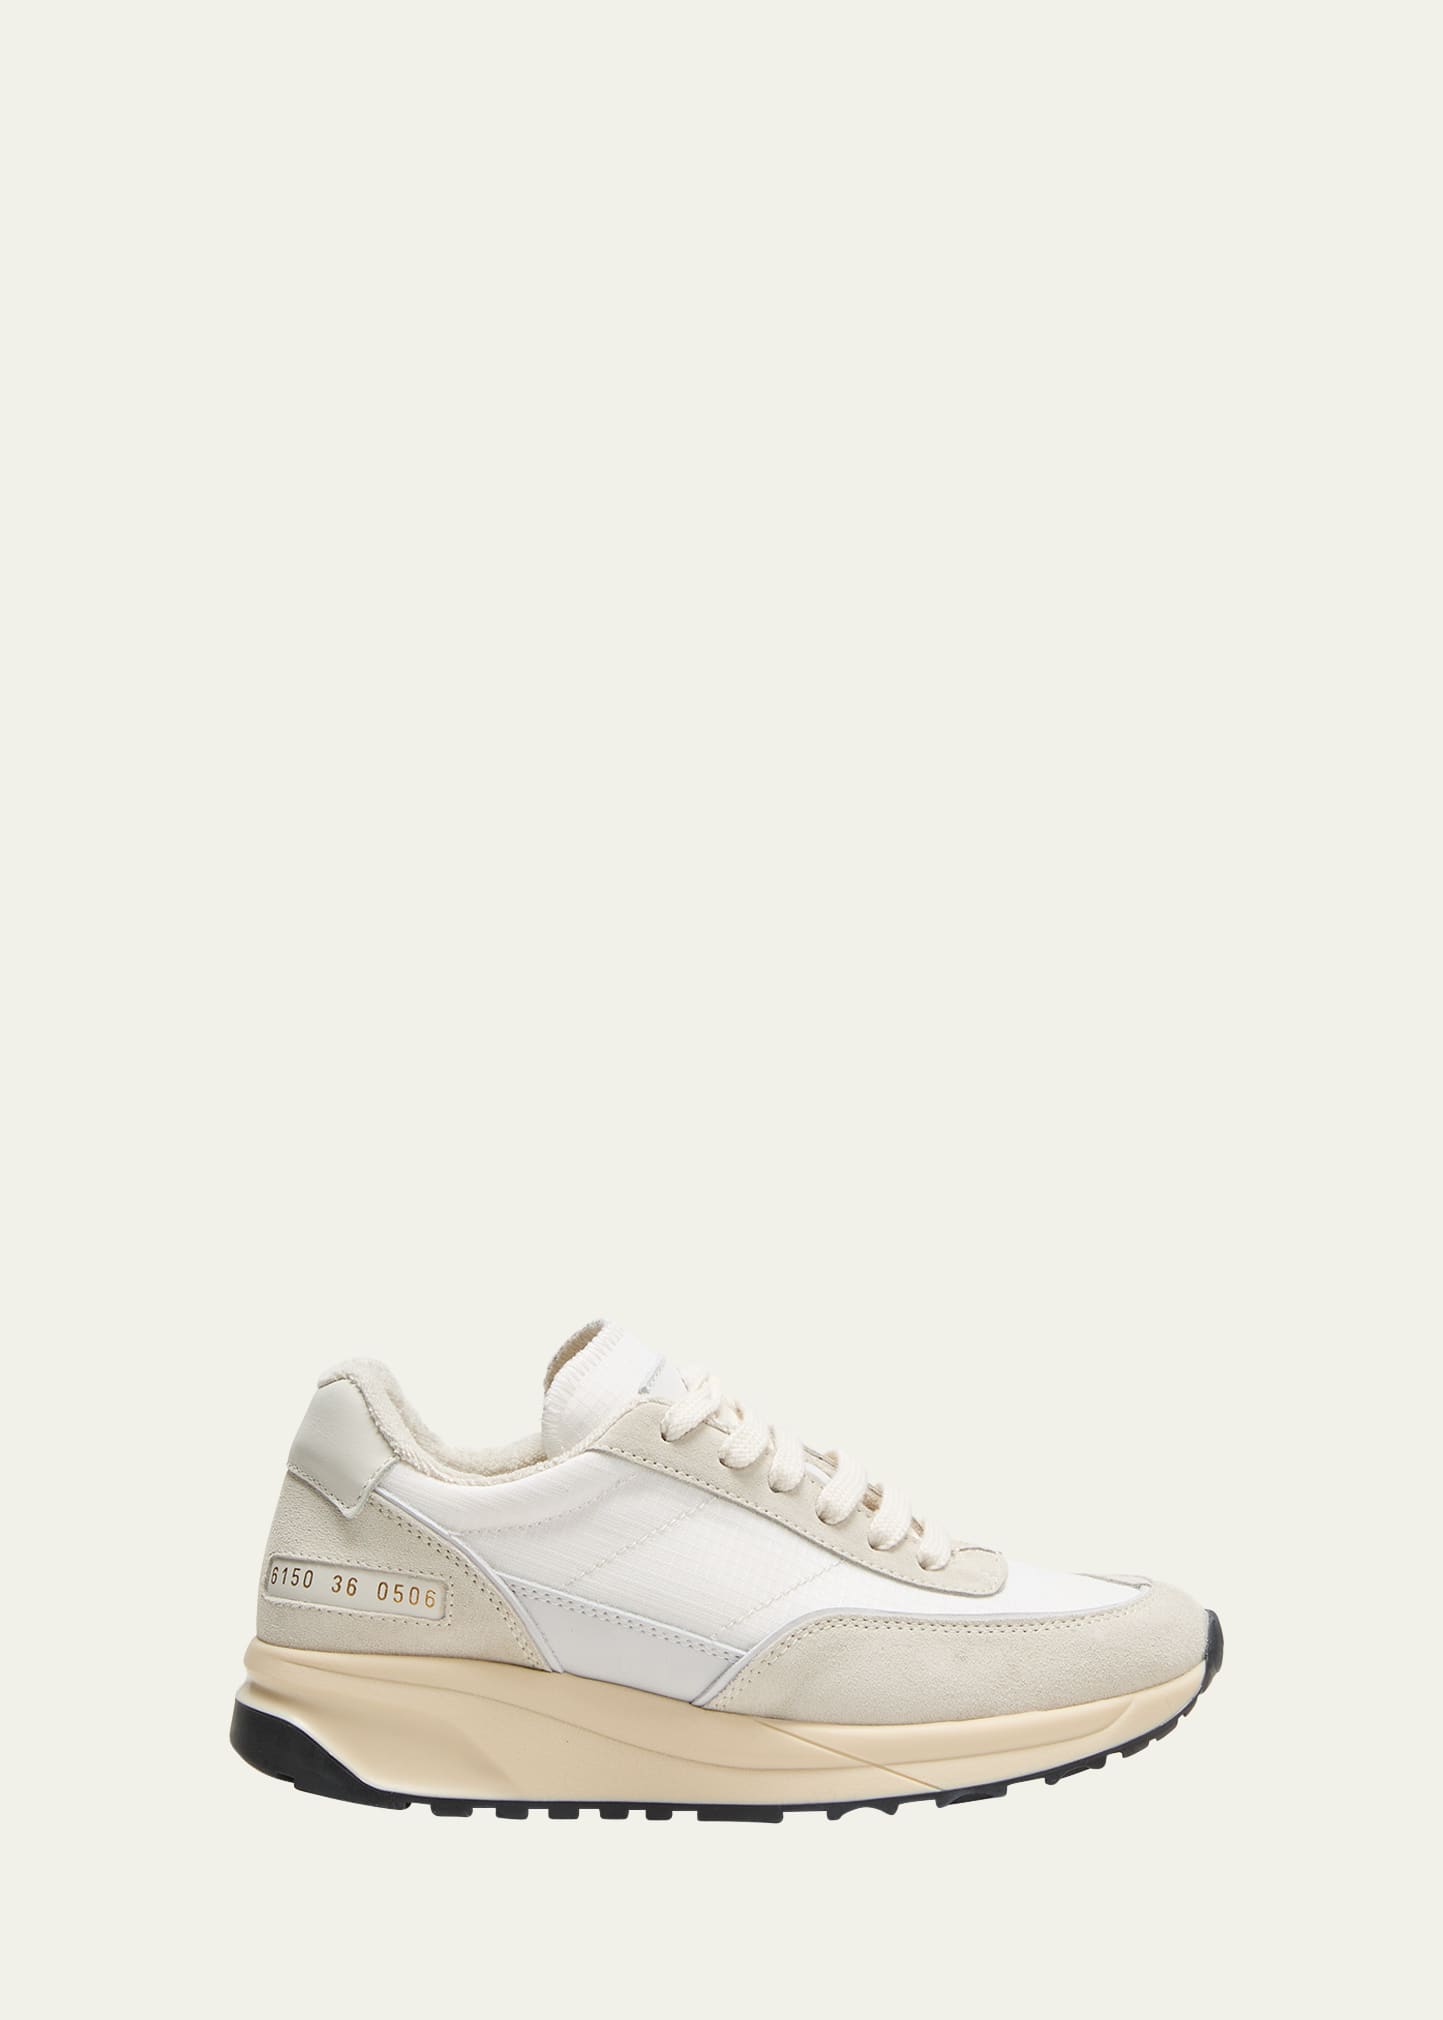 Shop Common Projects Bicolor Suede Track Sneakers In 0506 - White